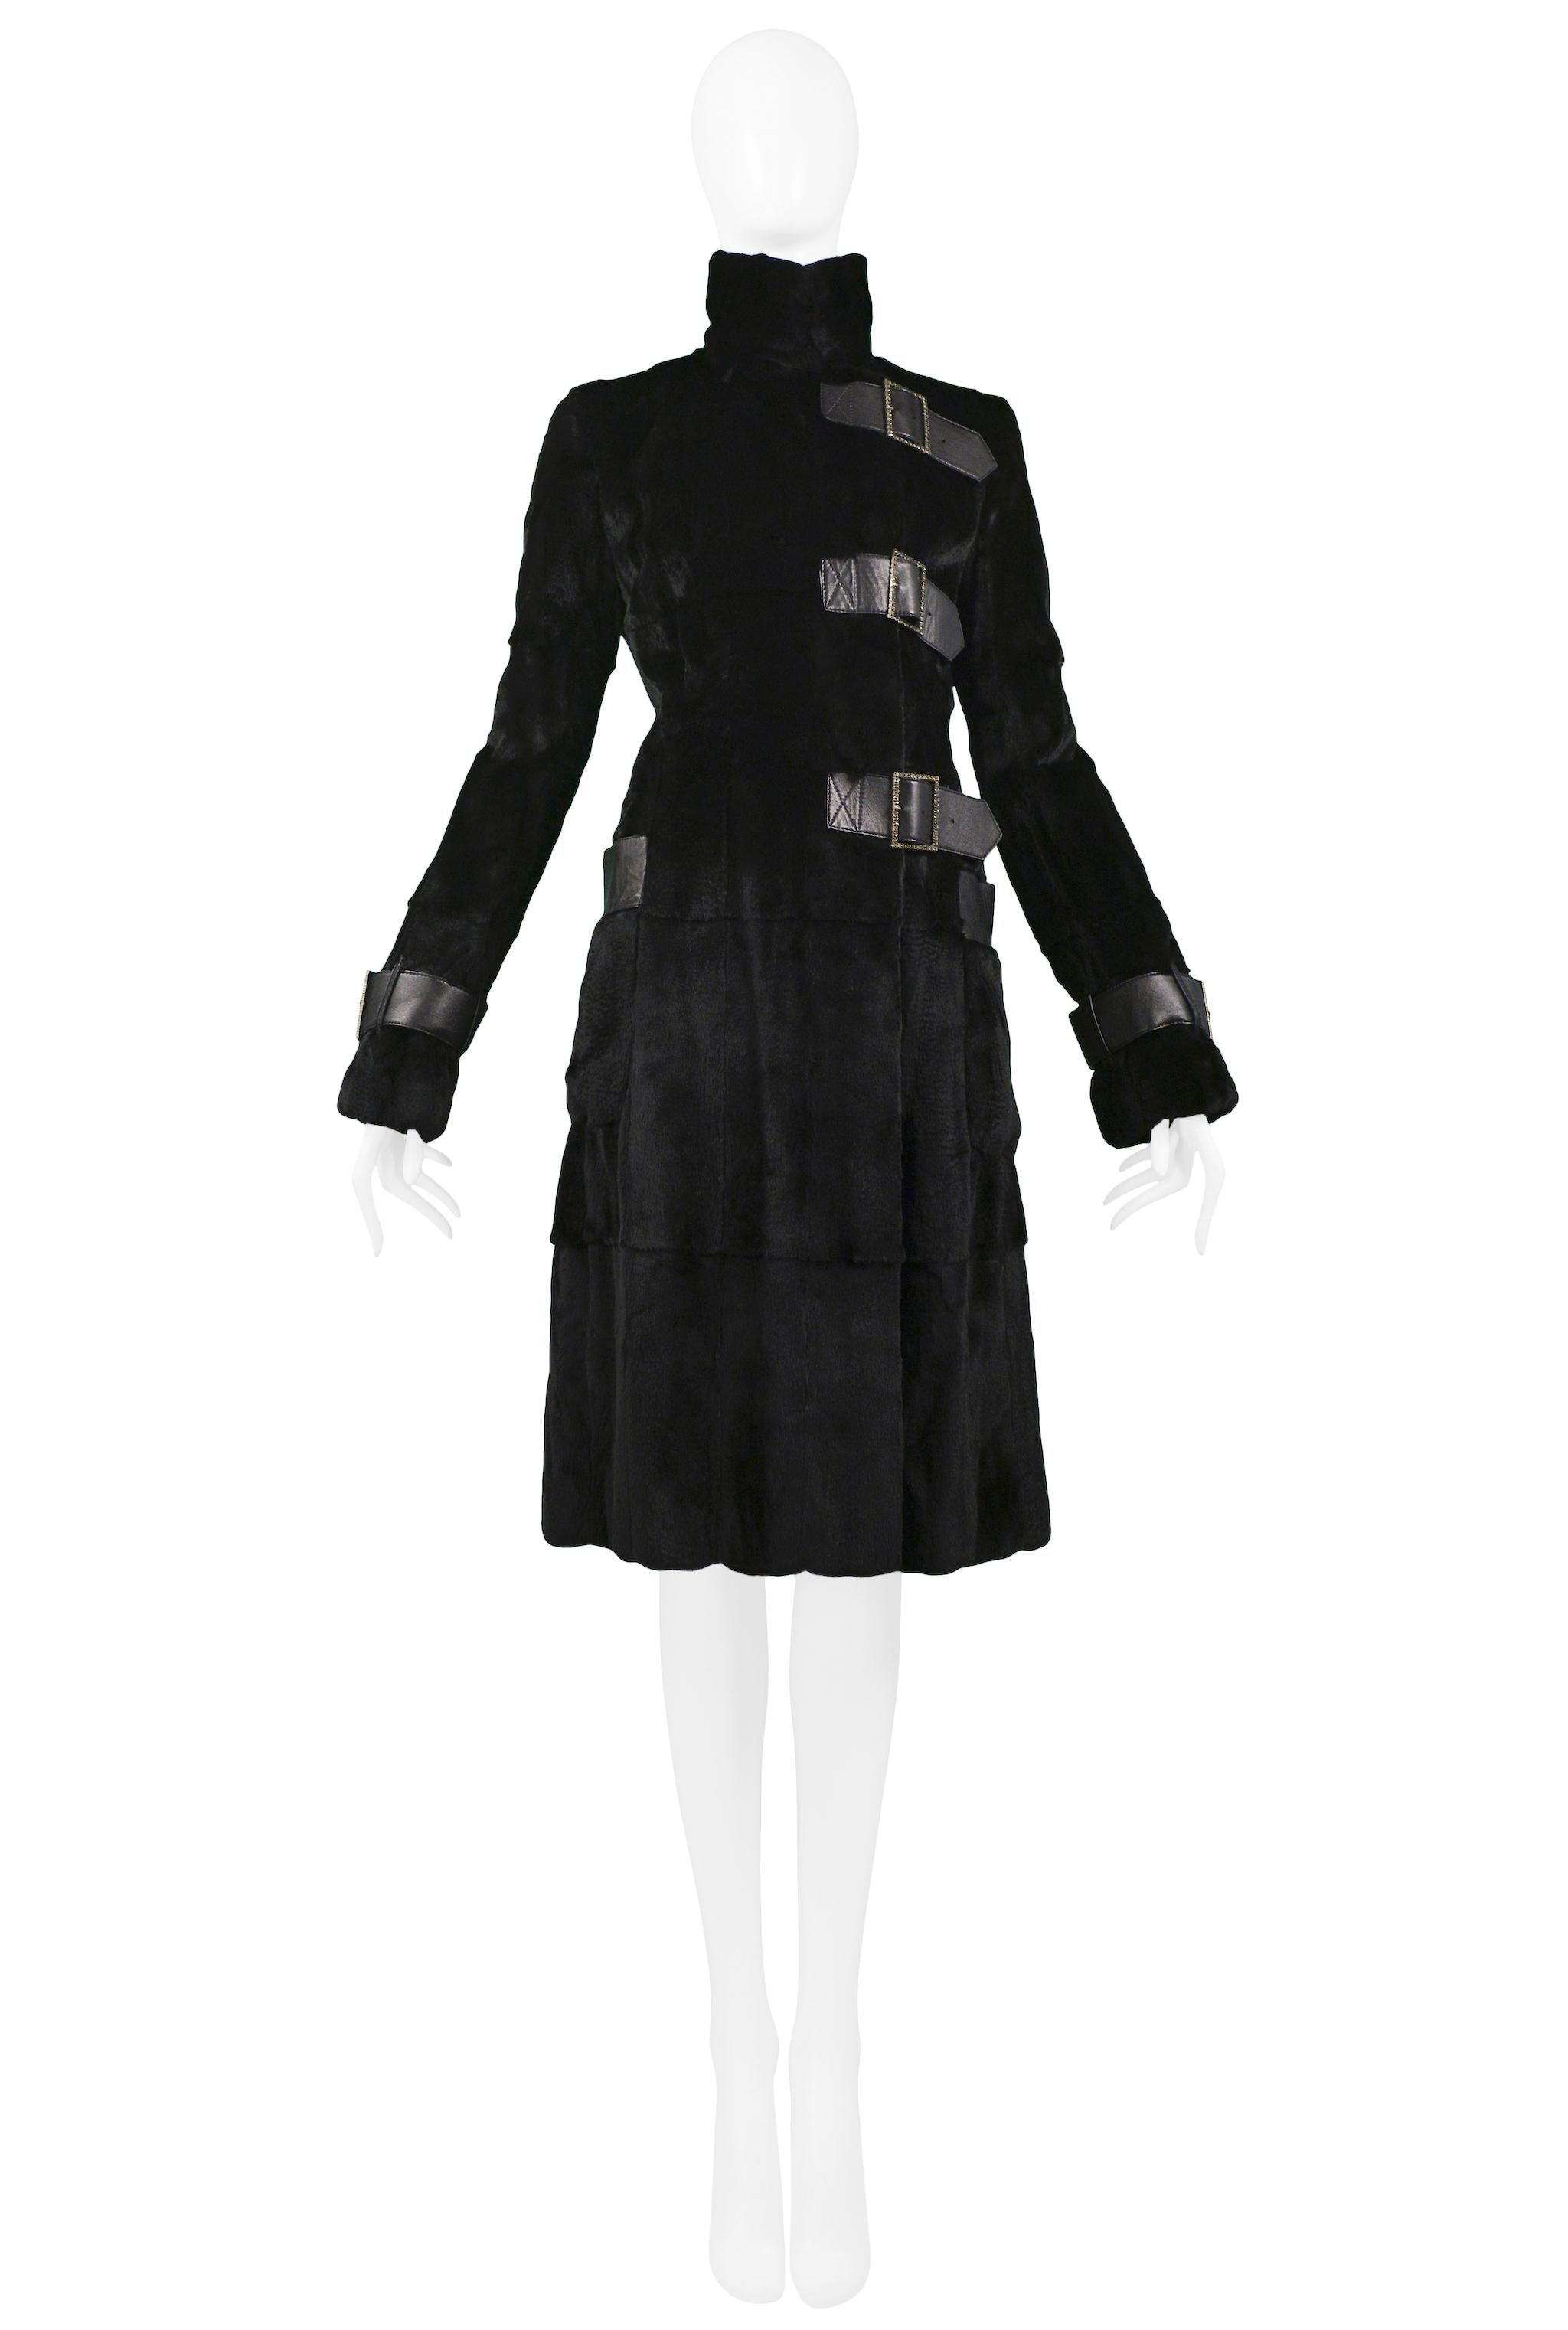 Vintage Valentino black weasel fur knee-length coat featuring a standing collar, offset black leather straps with rhinestone buckles at center front closure and at cuffs, and black leather-trimmed pockets at hips.

Excellent Vintage